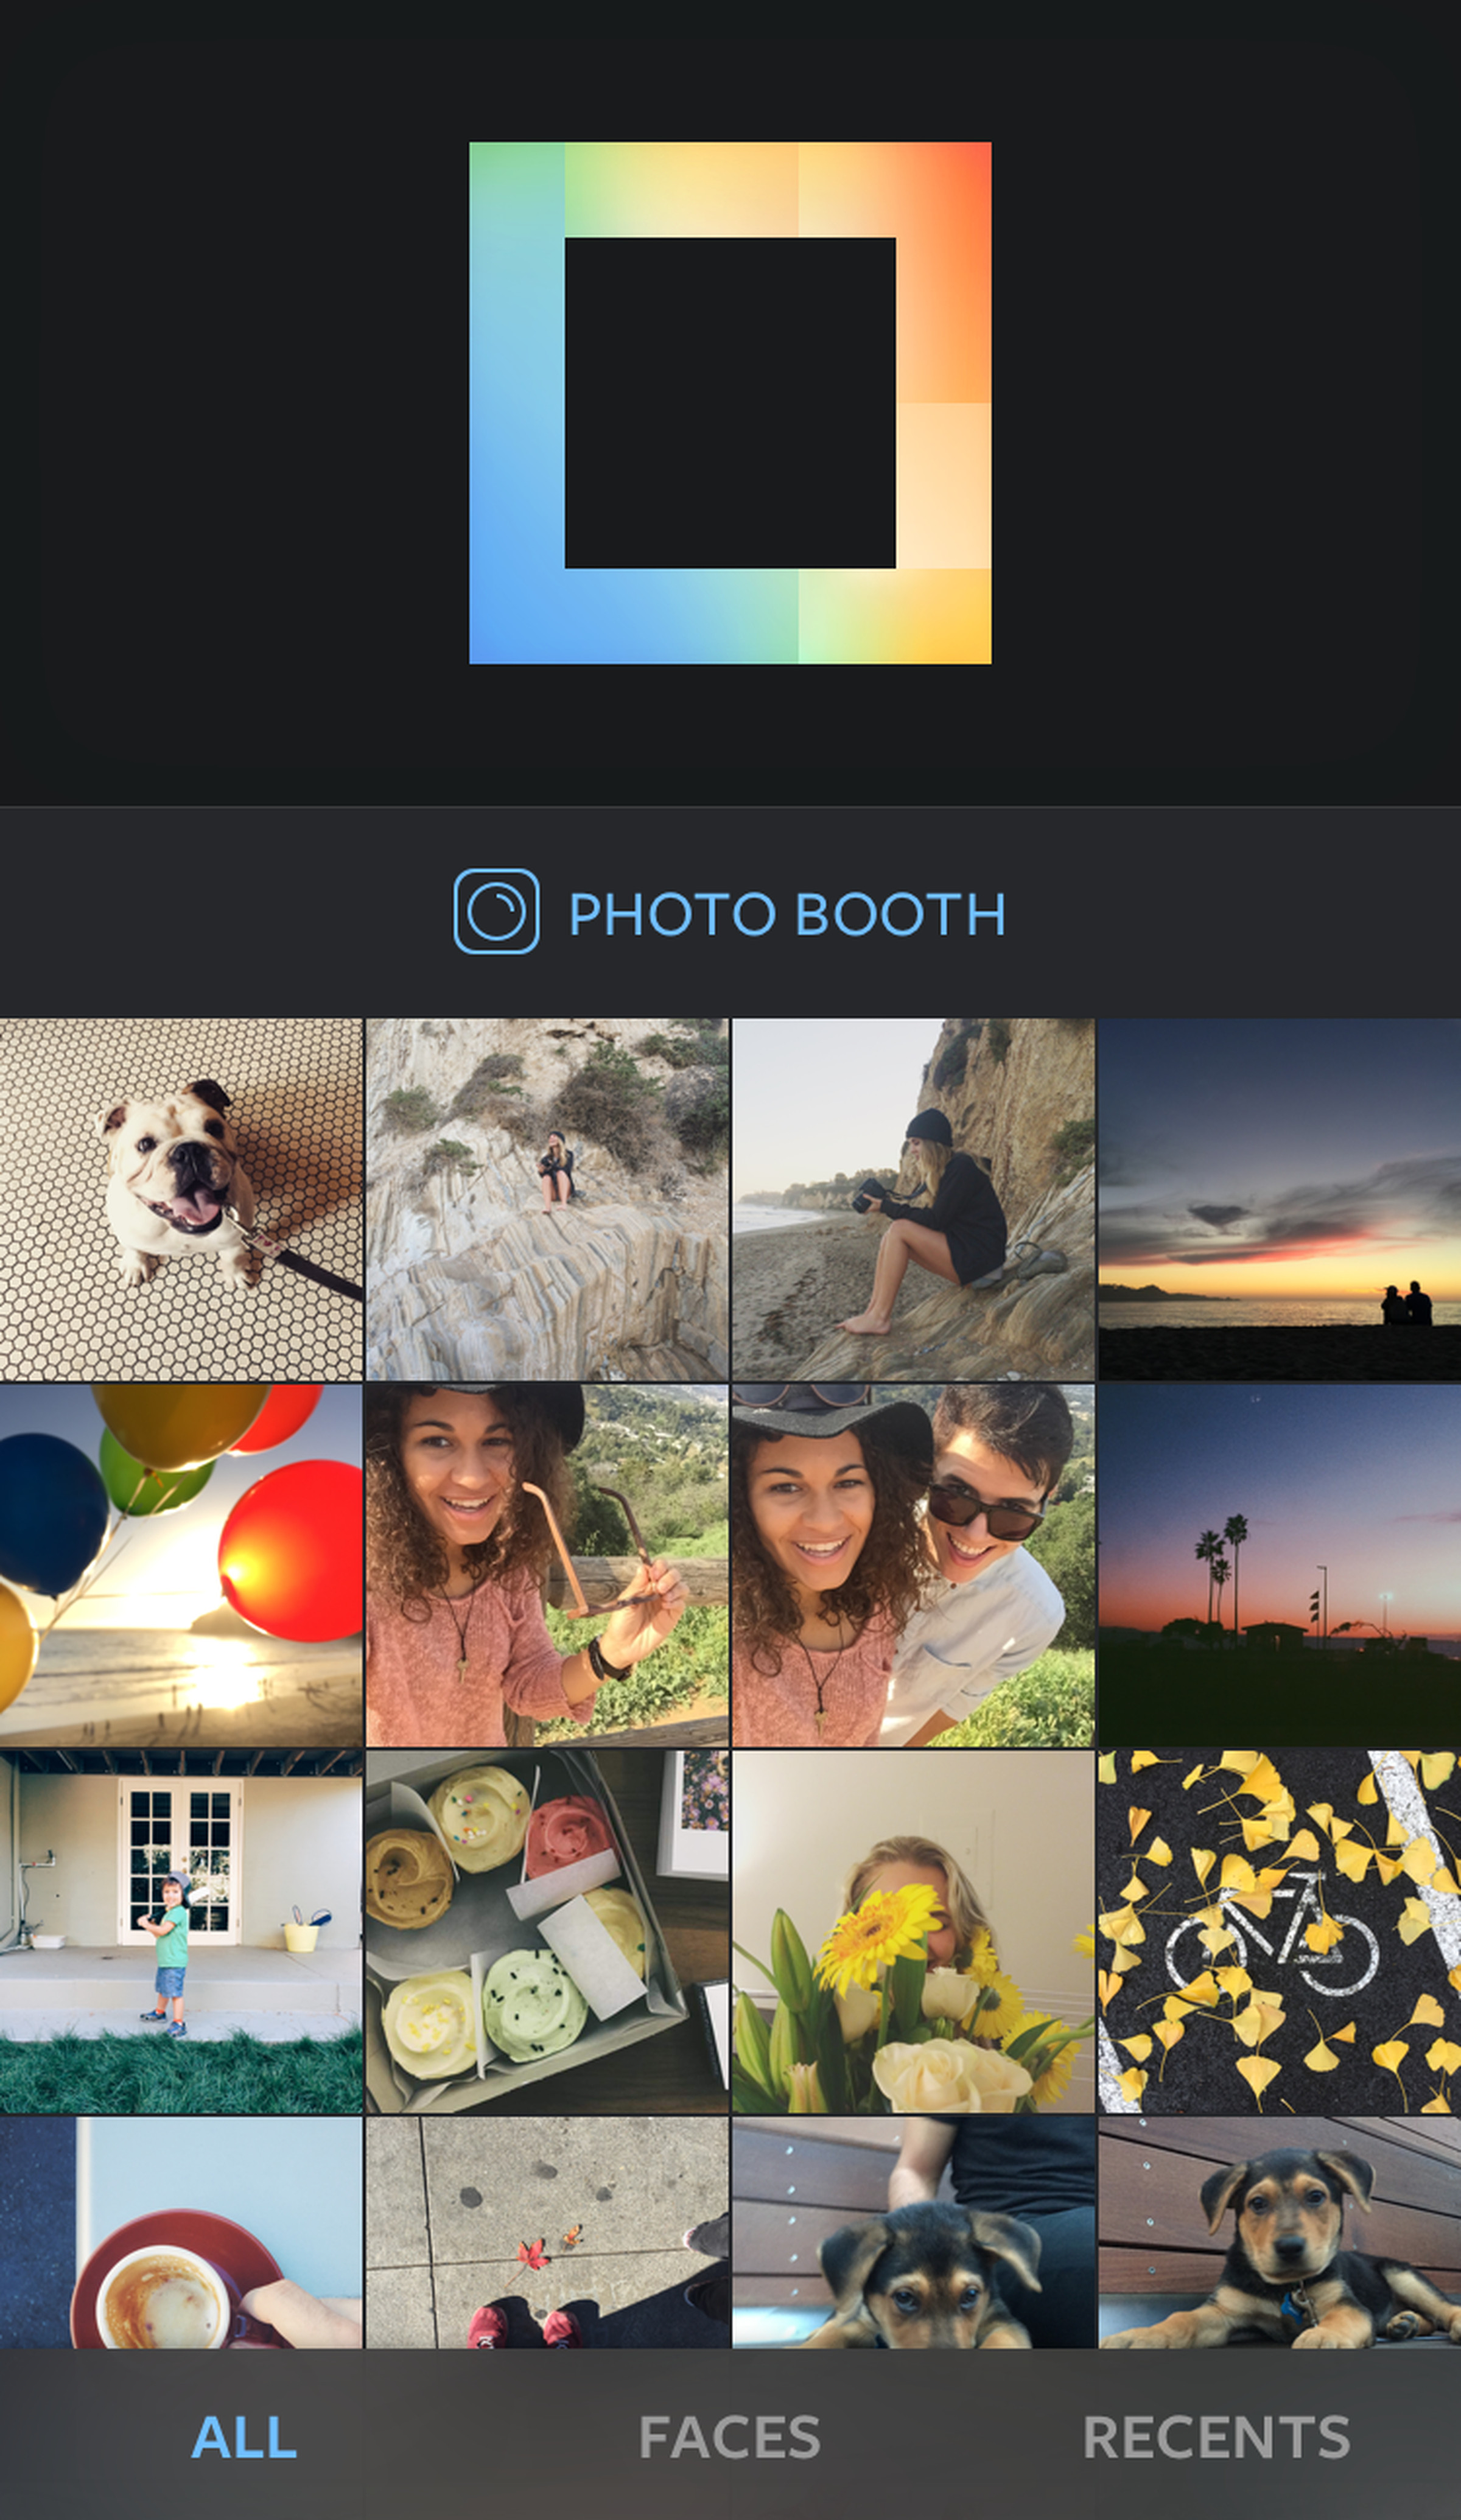 Layout by Instagram: user interface screenshots